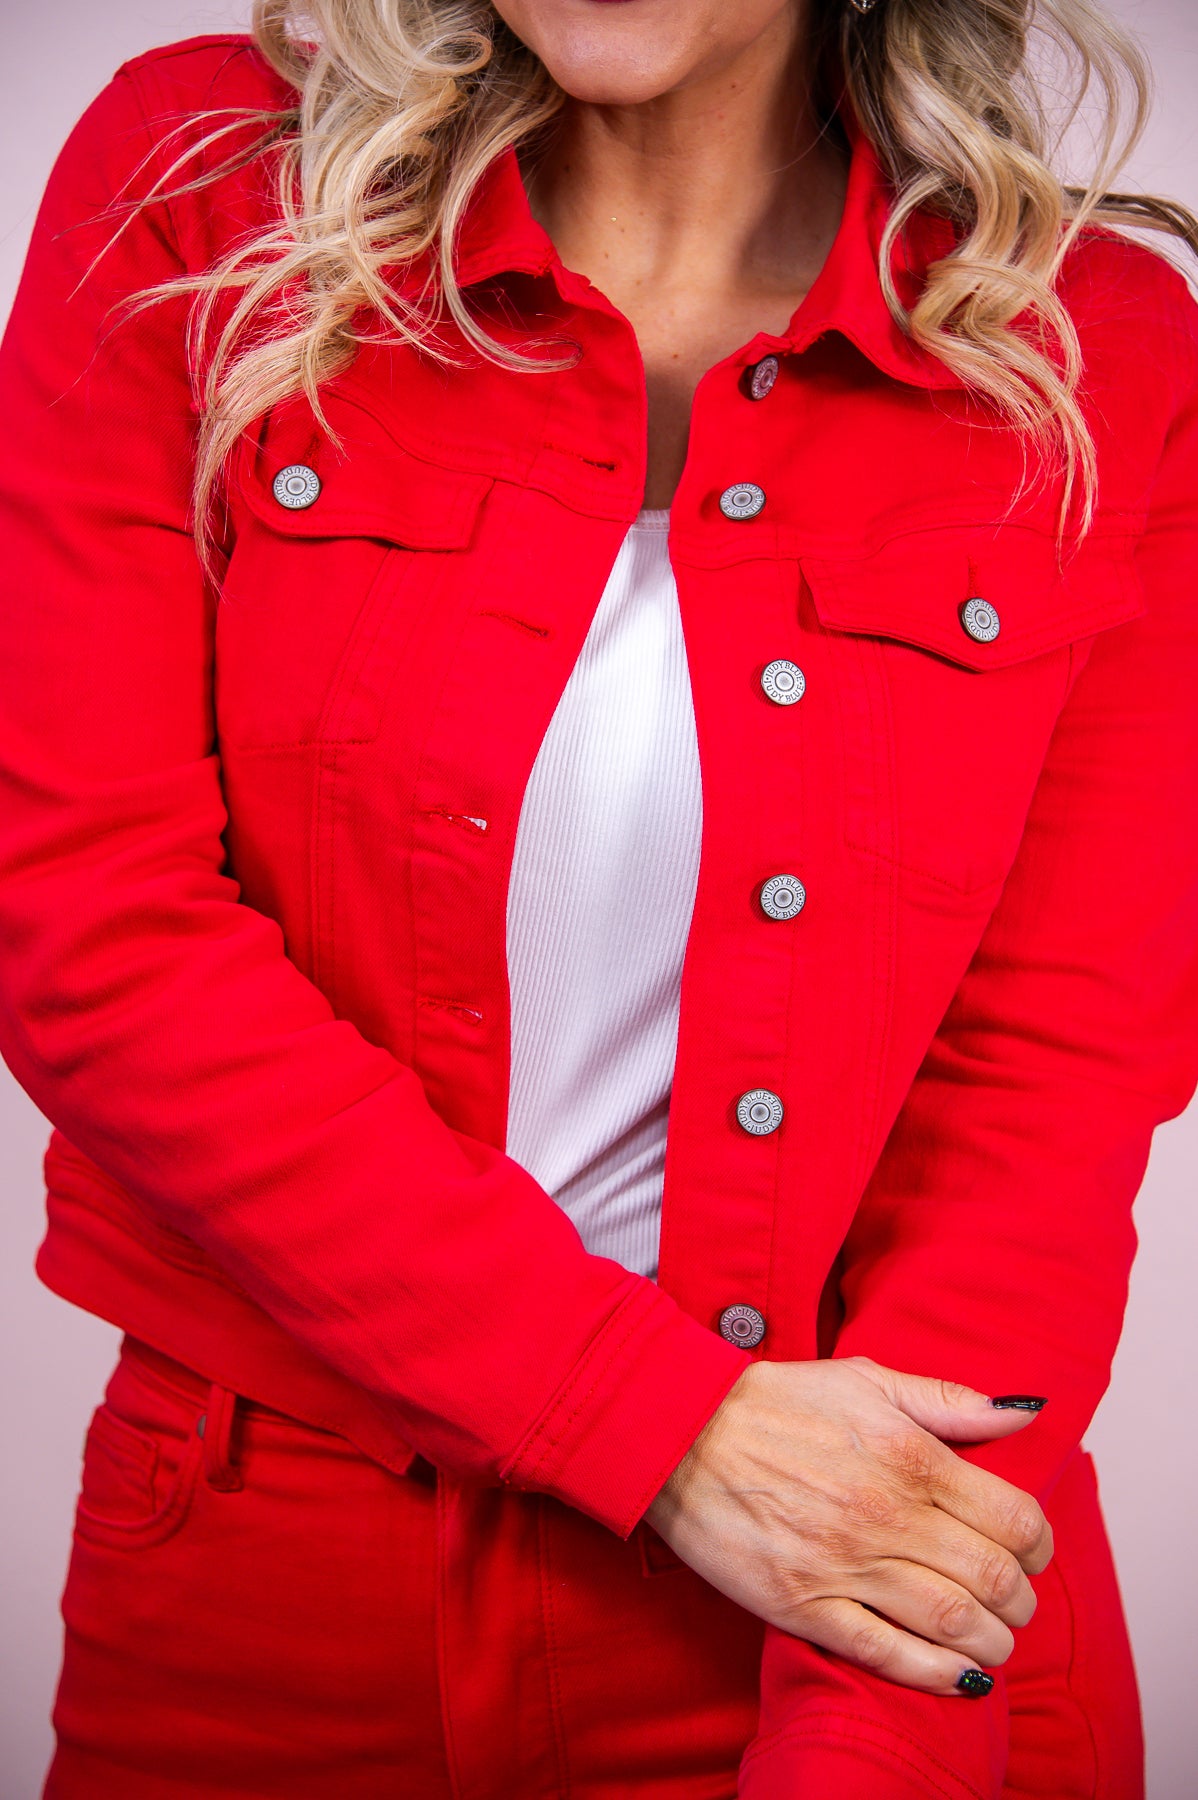 You're The Fire In My Heart Red Solid Denim Jacket - O5223RD